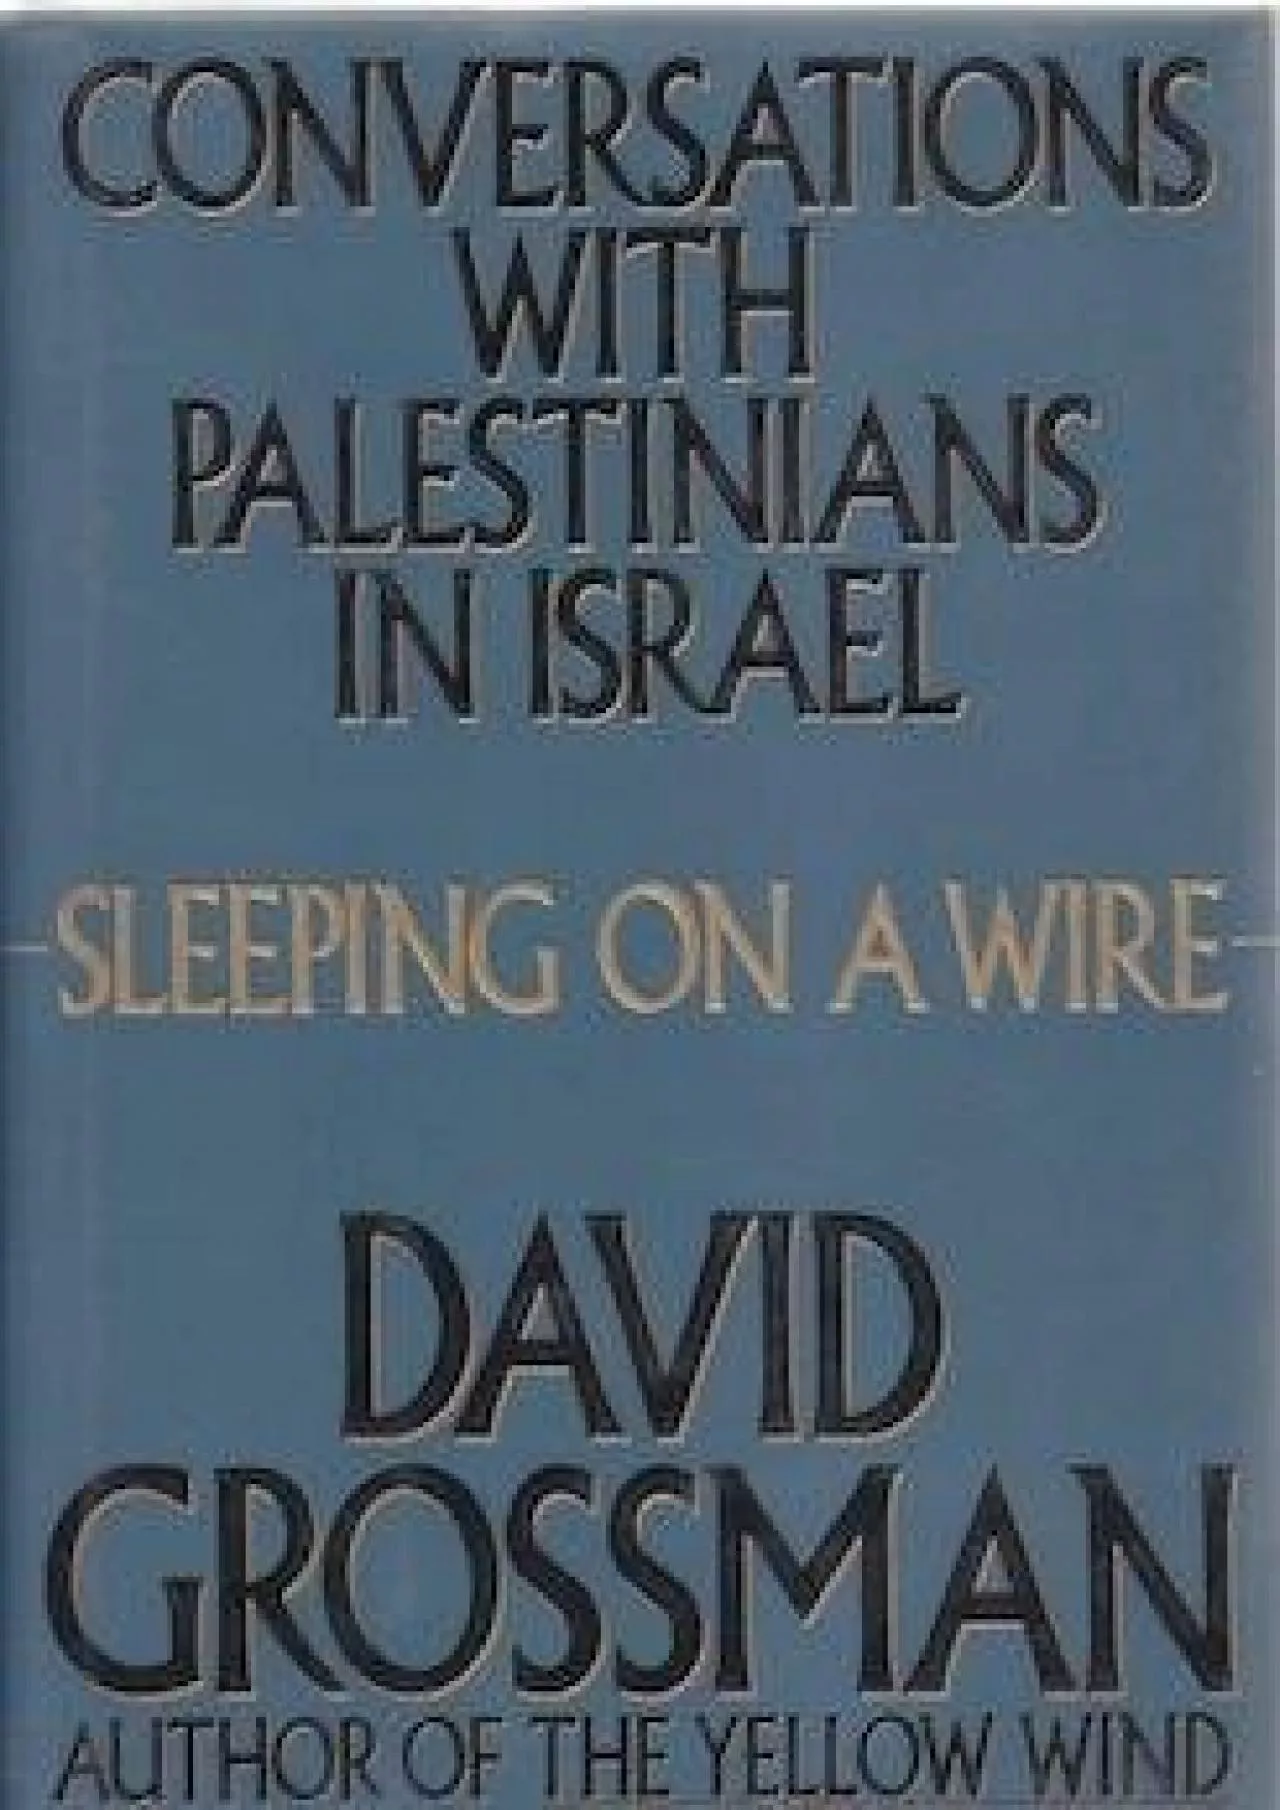 (DOWNLOAD)-Sleeping on a Wire: Conversations With Palestinians in Israel